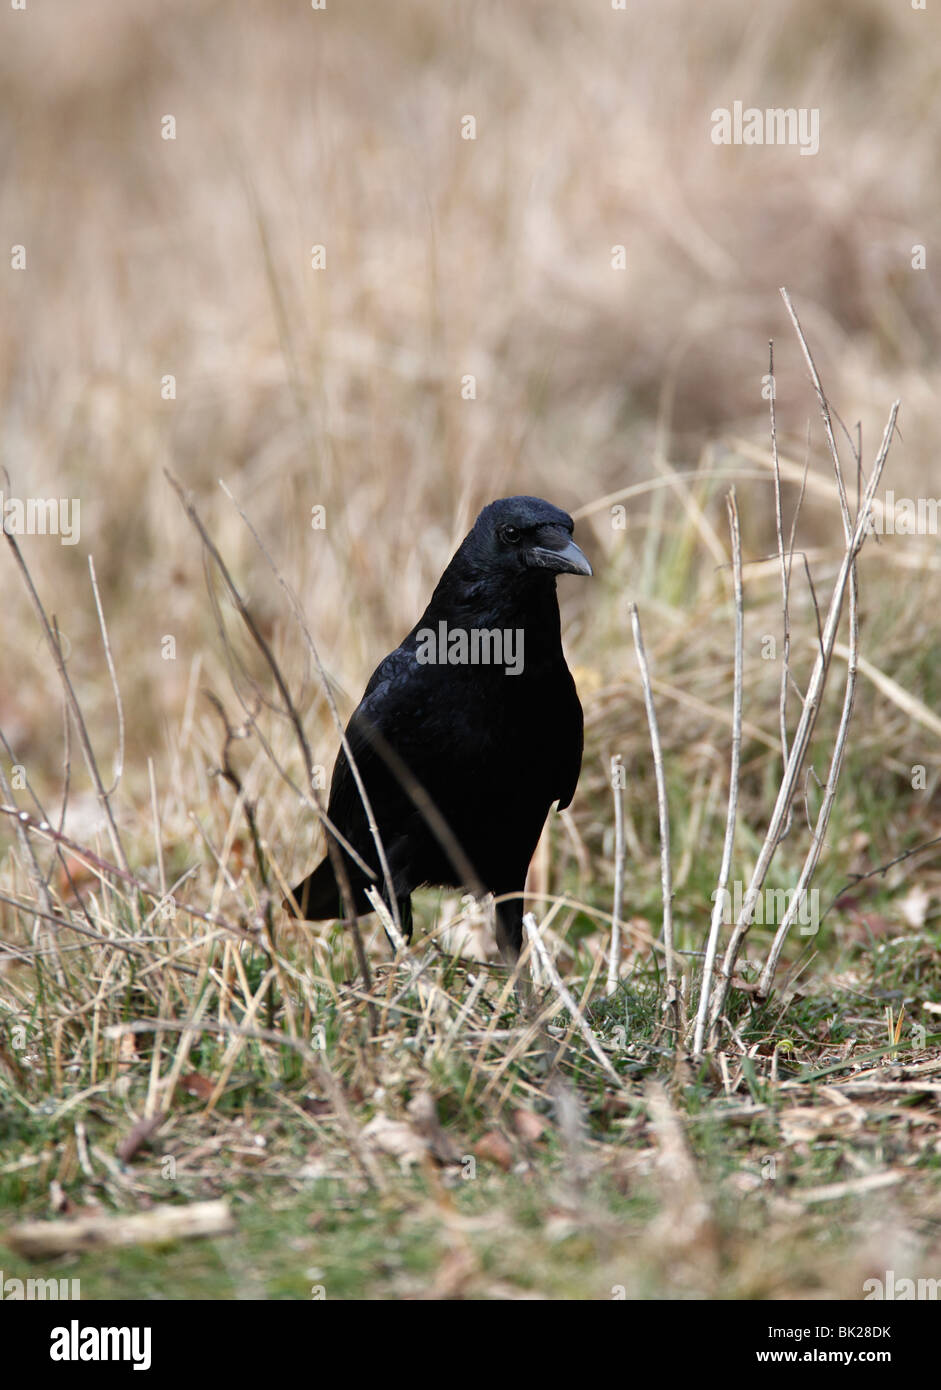 Carrion crow (Corvus corone) standing in long grass front view Stock Photo